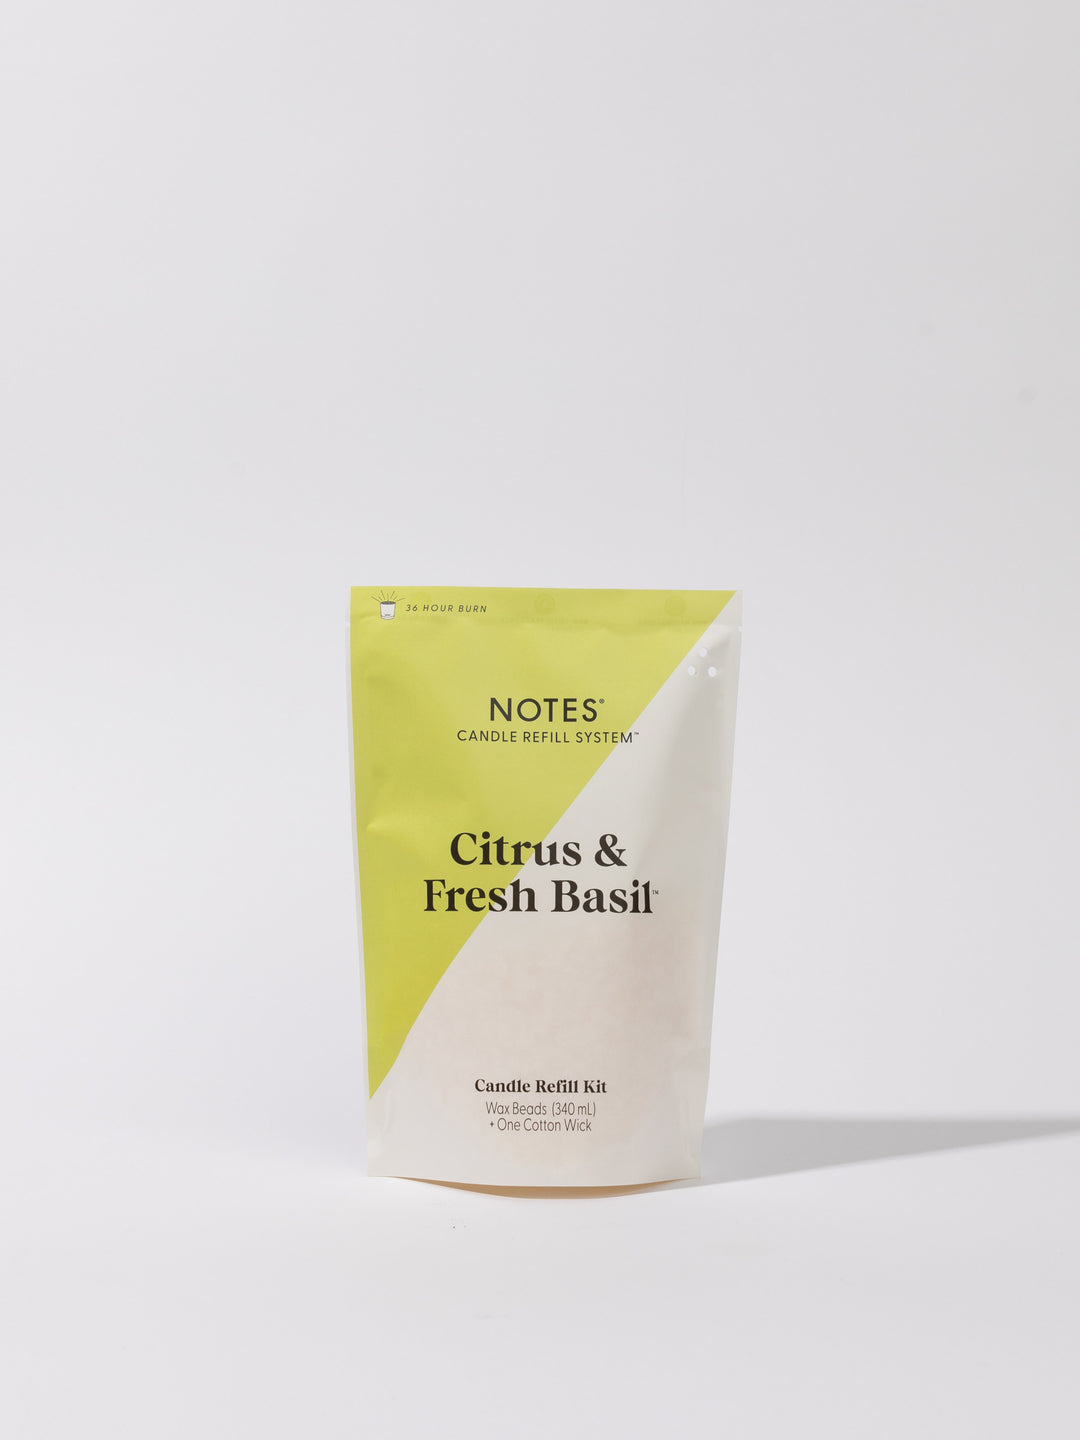 Sustainable Candle Refill Kit - NOTES Citrus & Fresh Basil